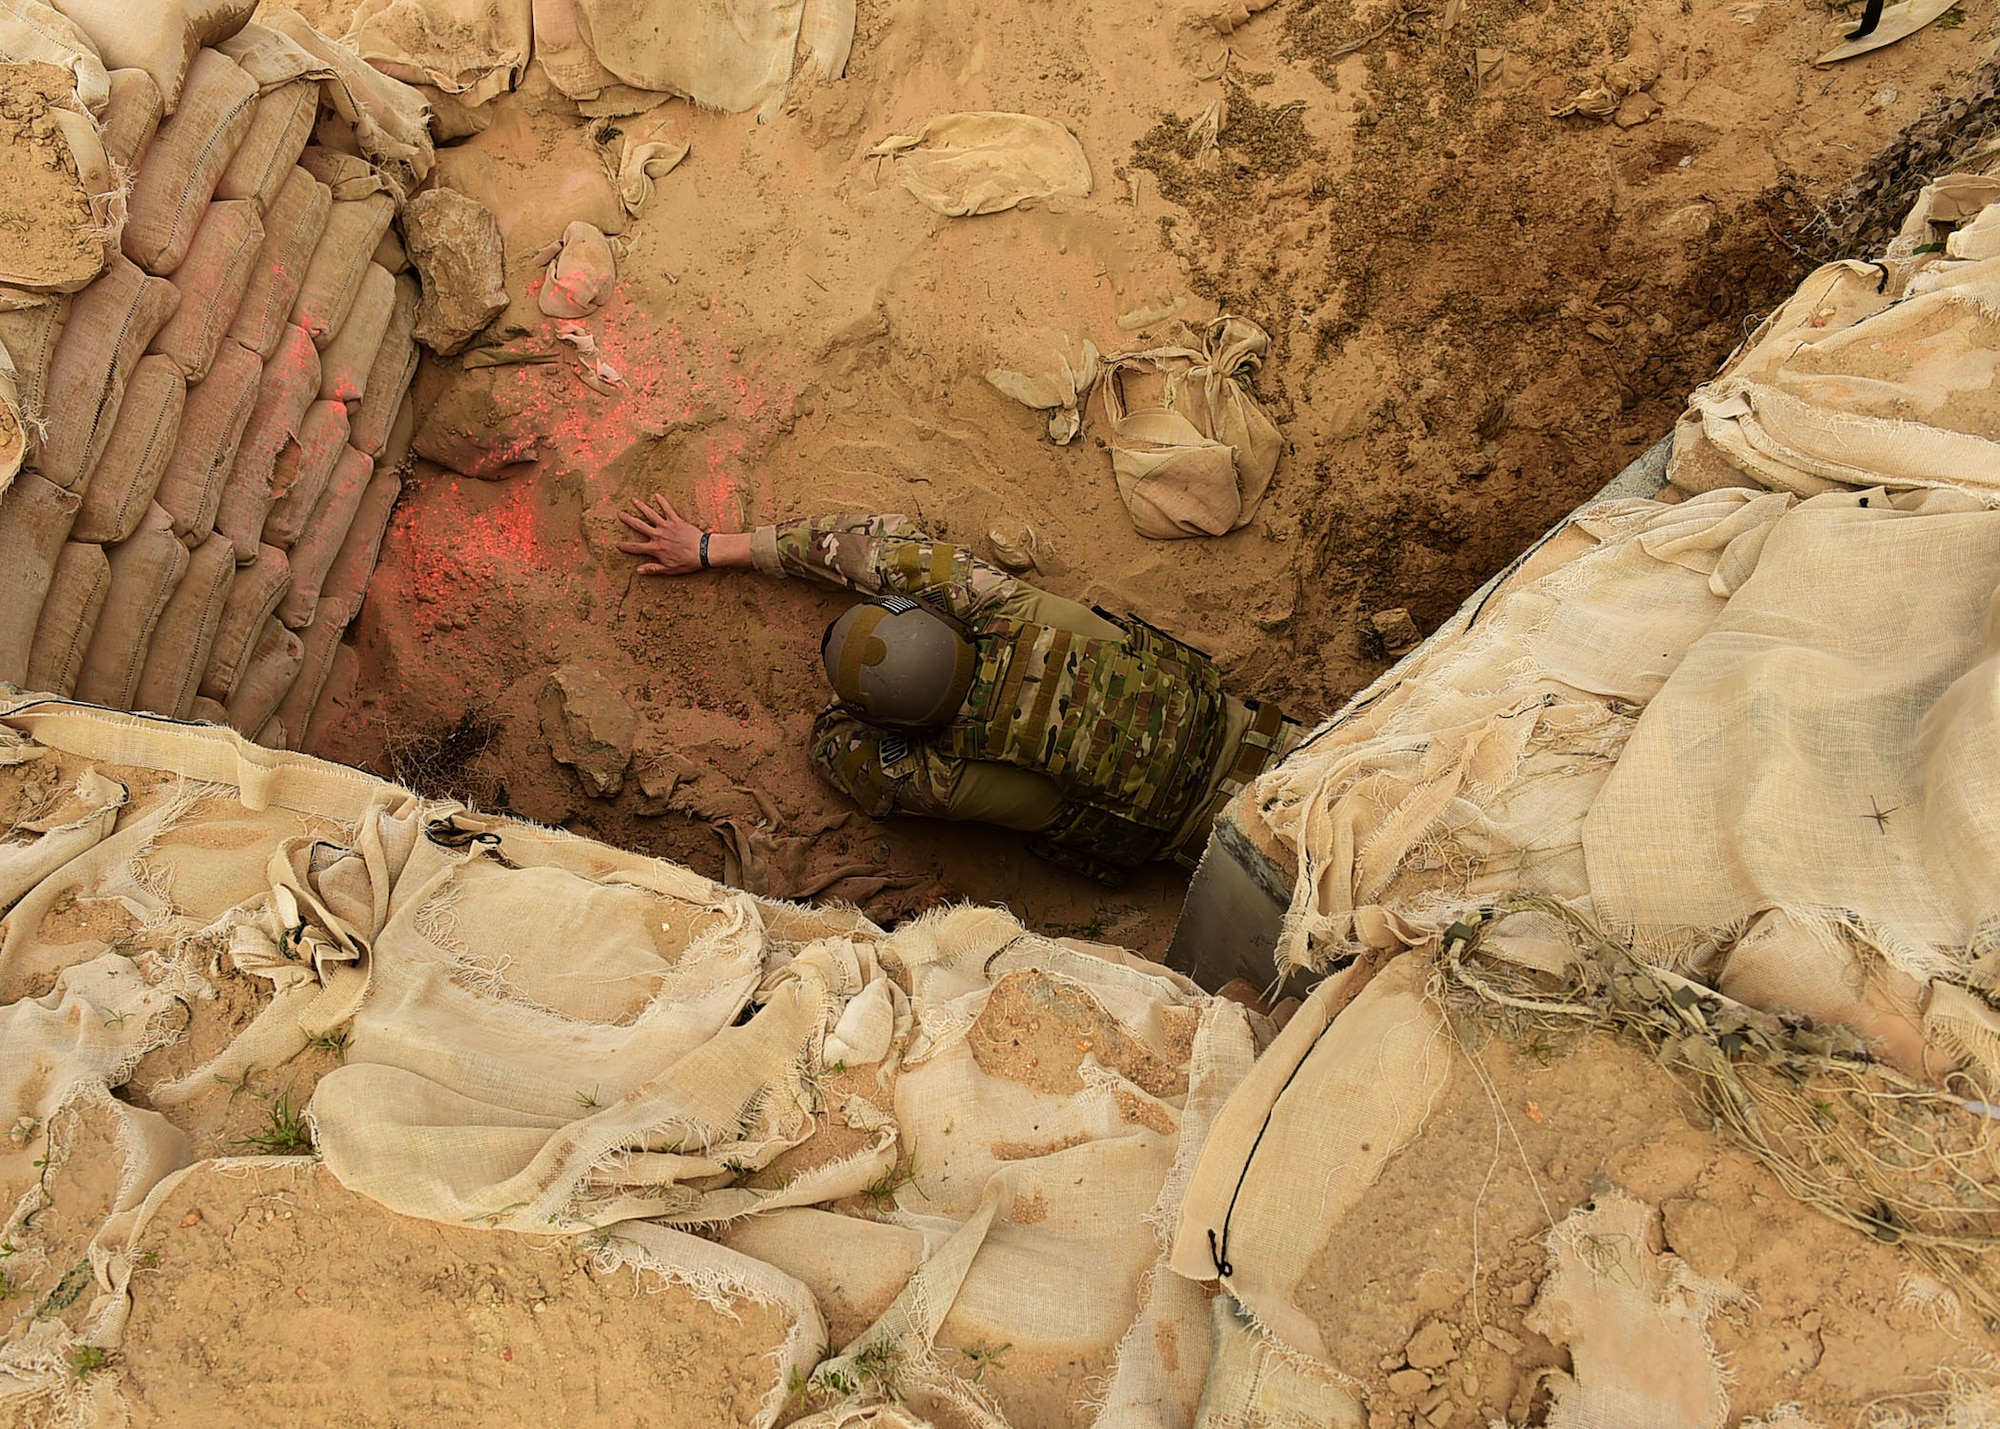 Staff Sgt. Andrew Croop, a 386th Air Expeditionary Wing explosive ordnance disposal technician, conducts a finger sweep for ordnances during a joint EOD training exercise at an undisclosed location in Southwest Asia, Dec. 15, 2015. The 386th EOD flight hosted Marine and Army EOD techs for the exercise as a way to learn from each other’s experiences and the different service’s methods. (U.S. Air Force photo by Staff Sgt. Jerilyn Quintanilla)